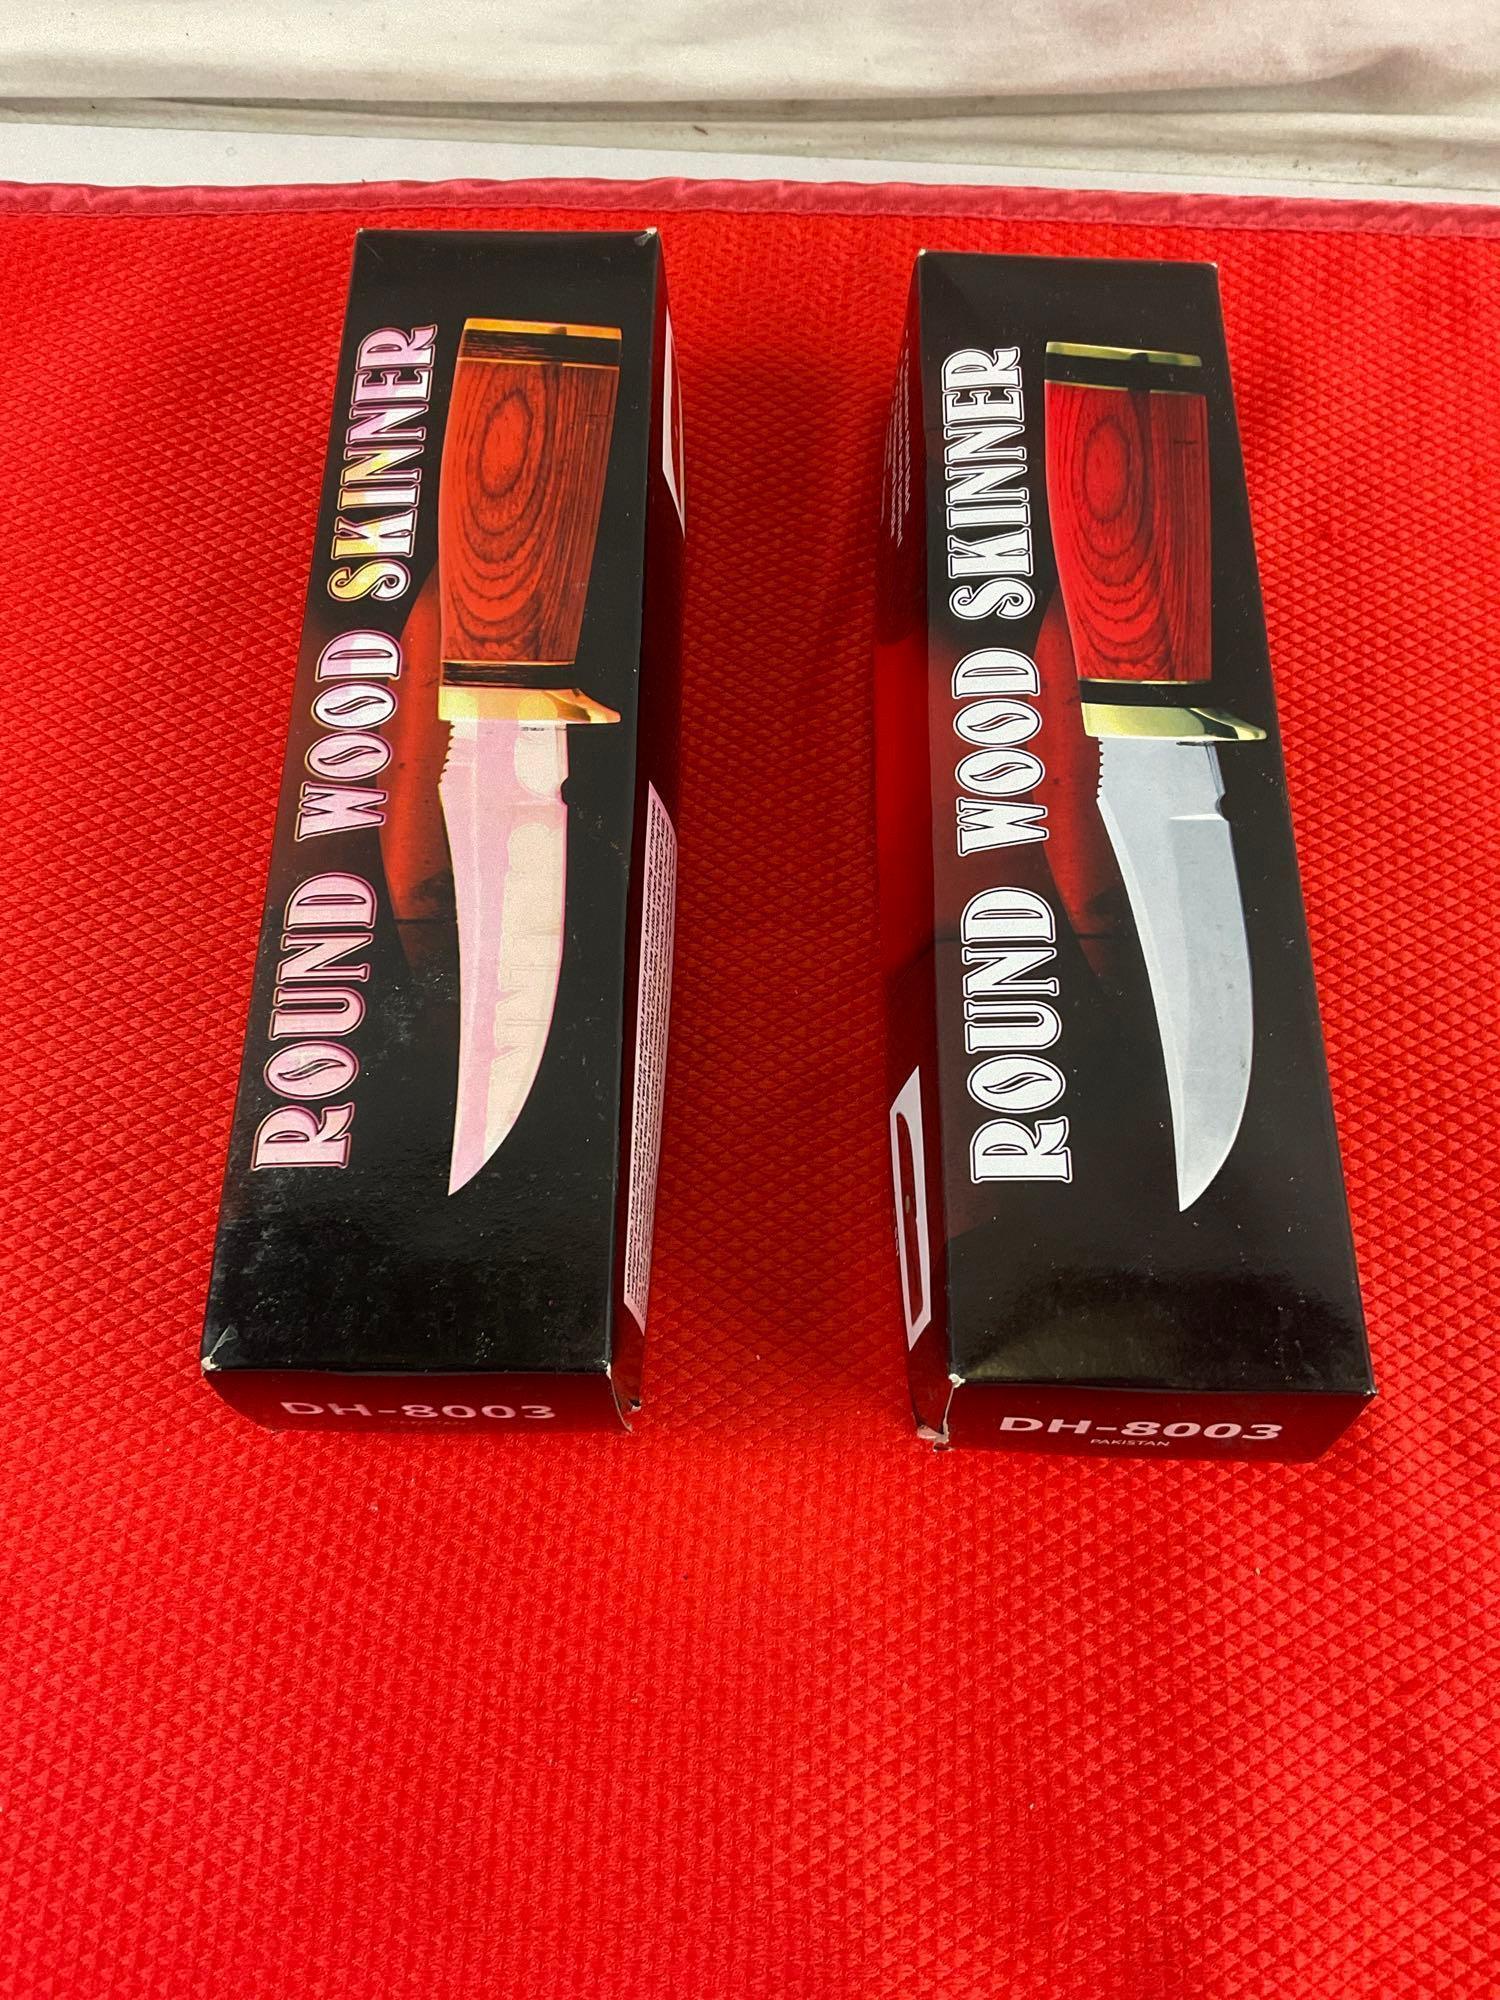 Pair of Pakistan Made 4" Stainless Steel Skinner Knives w/ Sheathes Model No. DH-8003. NIB. See